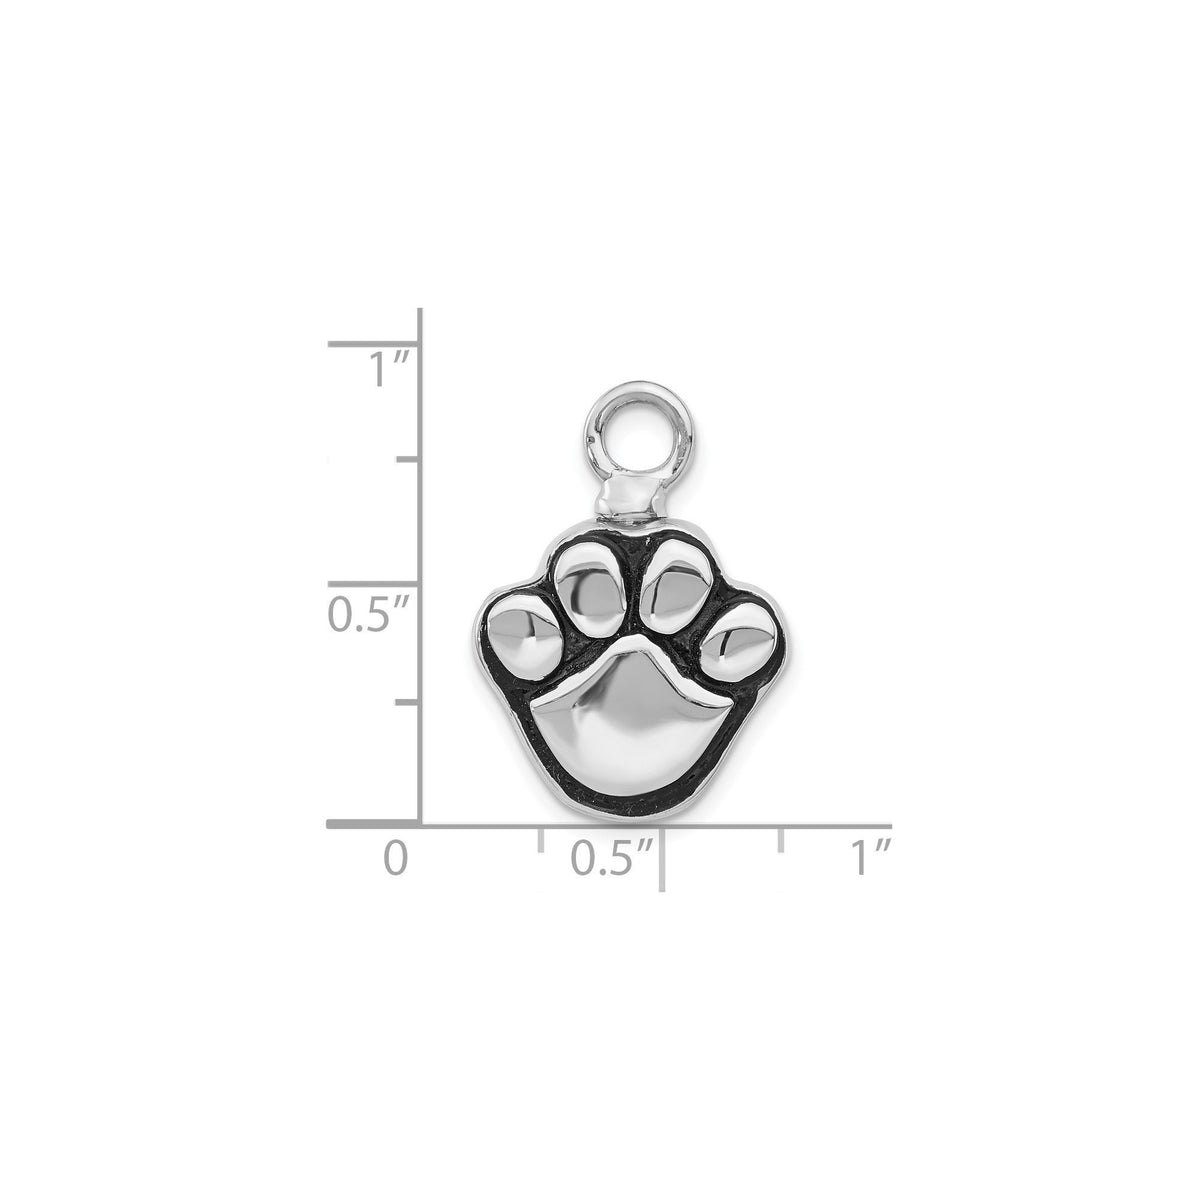 Pet Ash Hold Screw Top Puppy Paw Enameled Ash Holder Pendant Human Ashes or Pet Ashes - Gift Box Included - Dog Urn